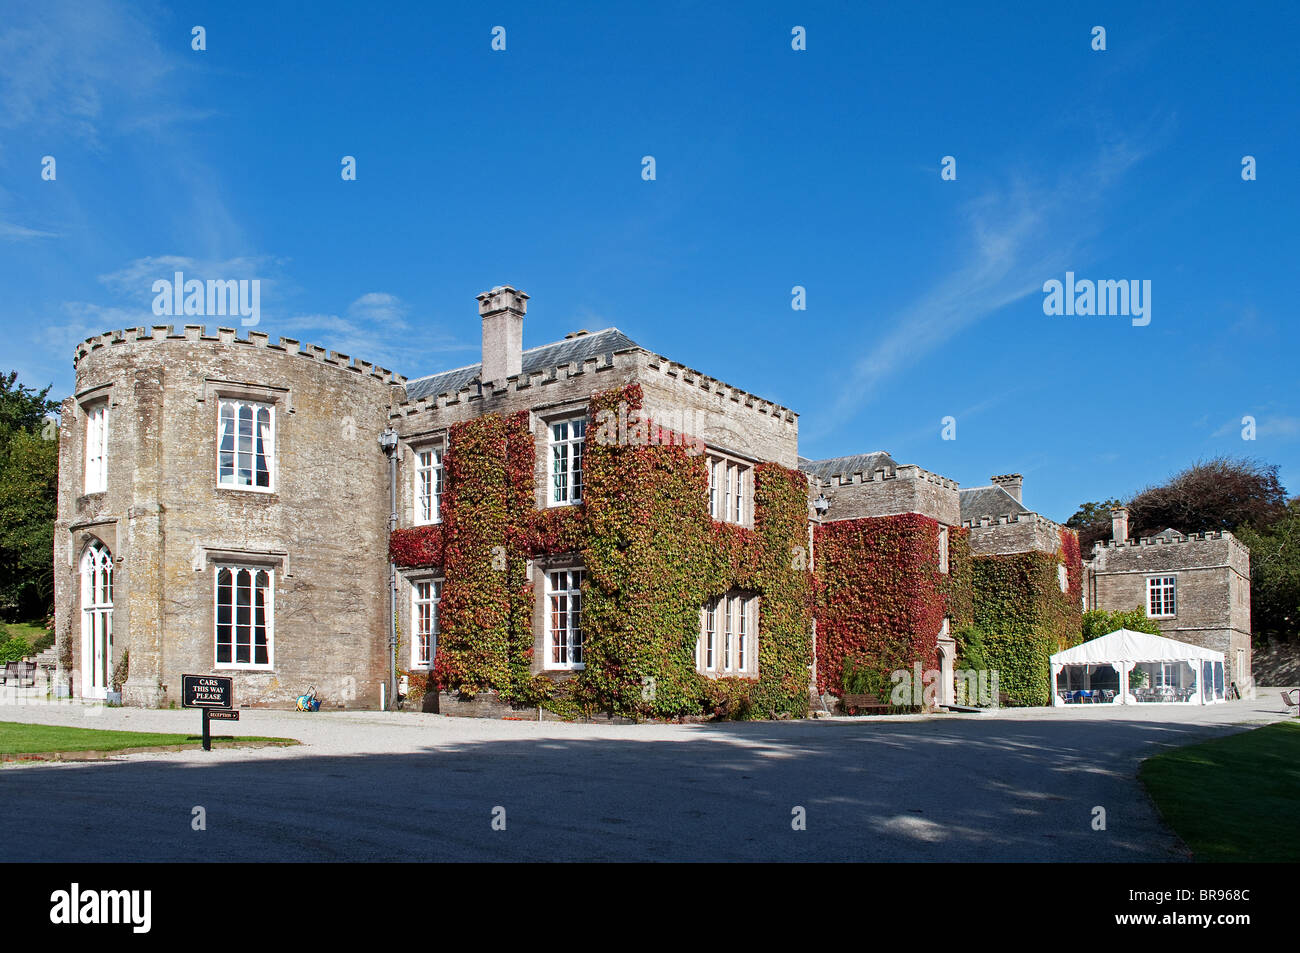 prideaux place at padstow in cornwall, uk Stock Photo